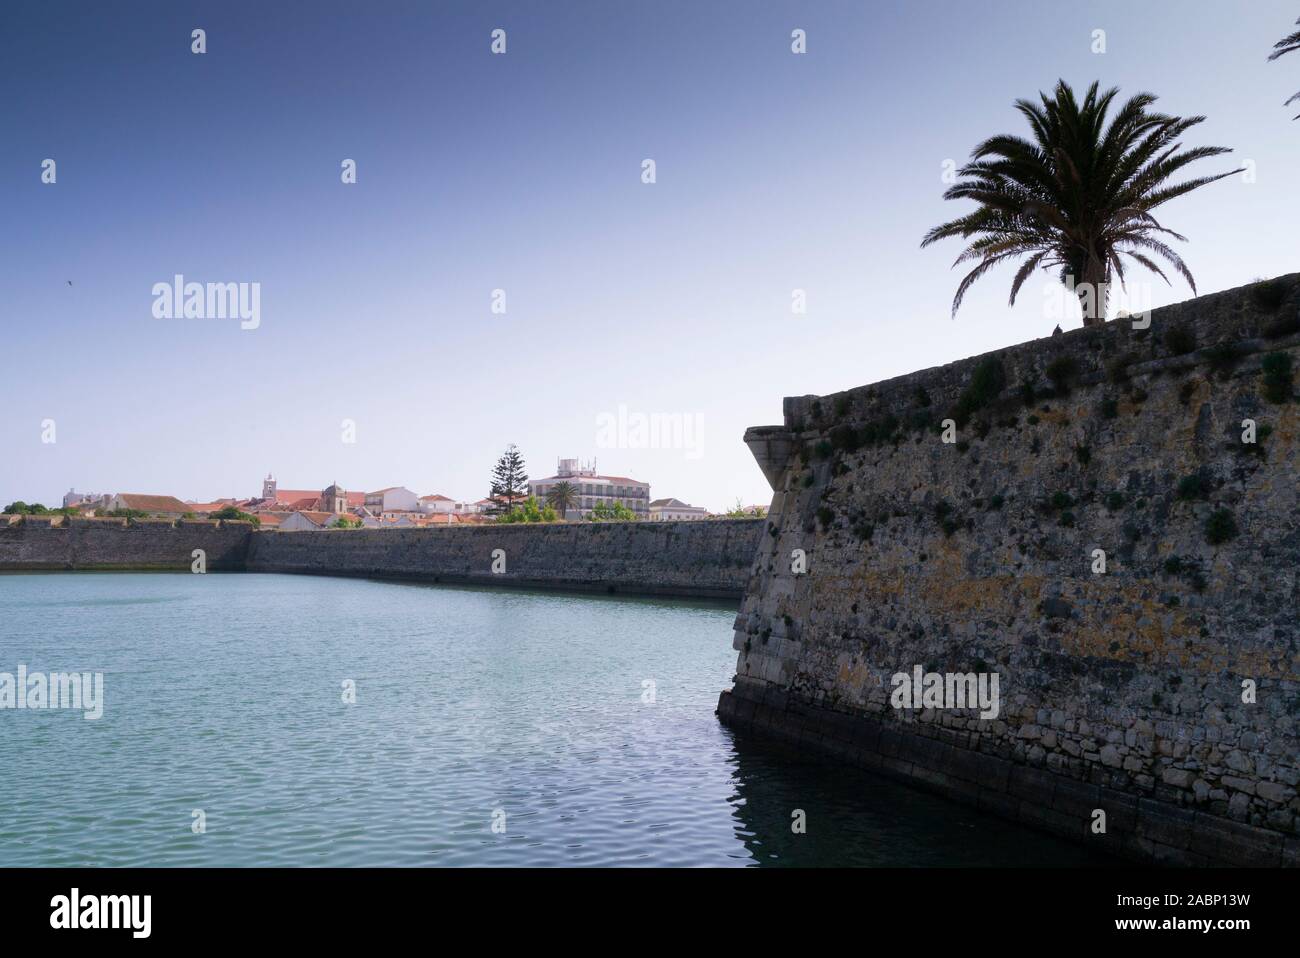 The old walls of the fortifications of Peniche Portugal Stock Photo